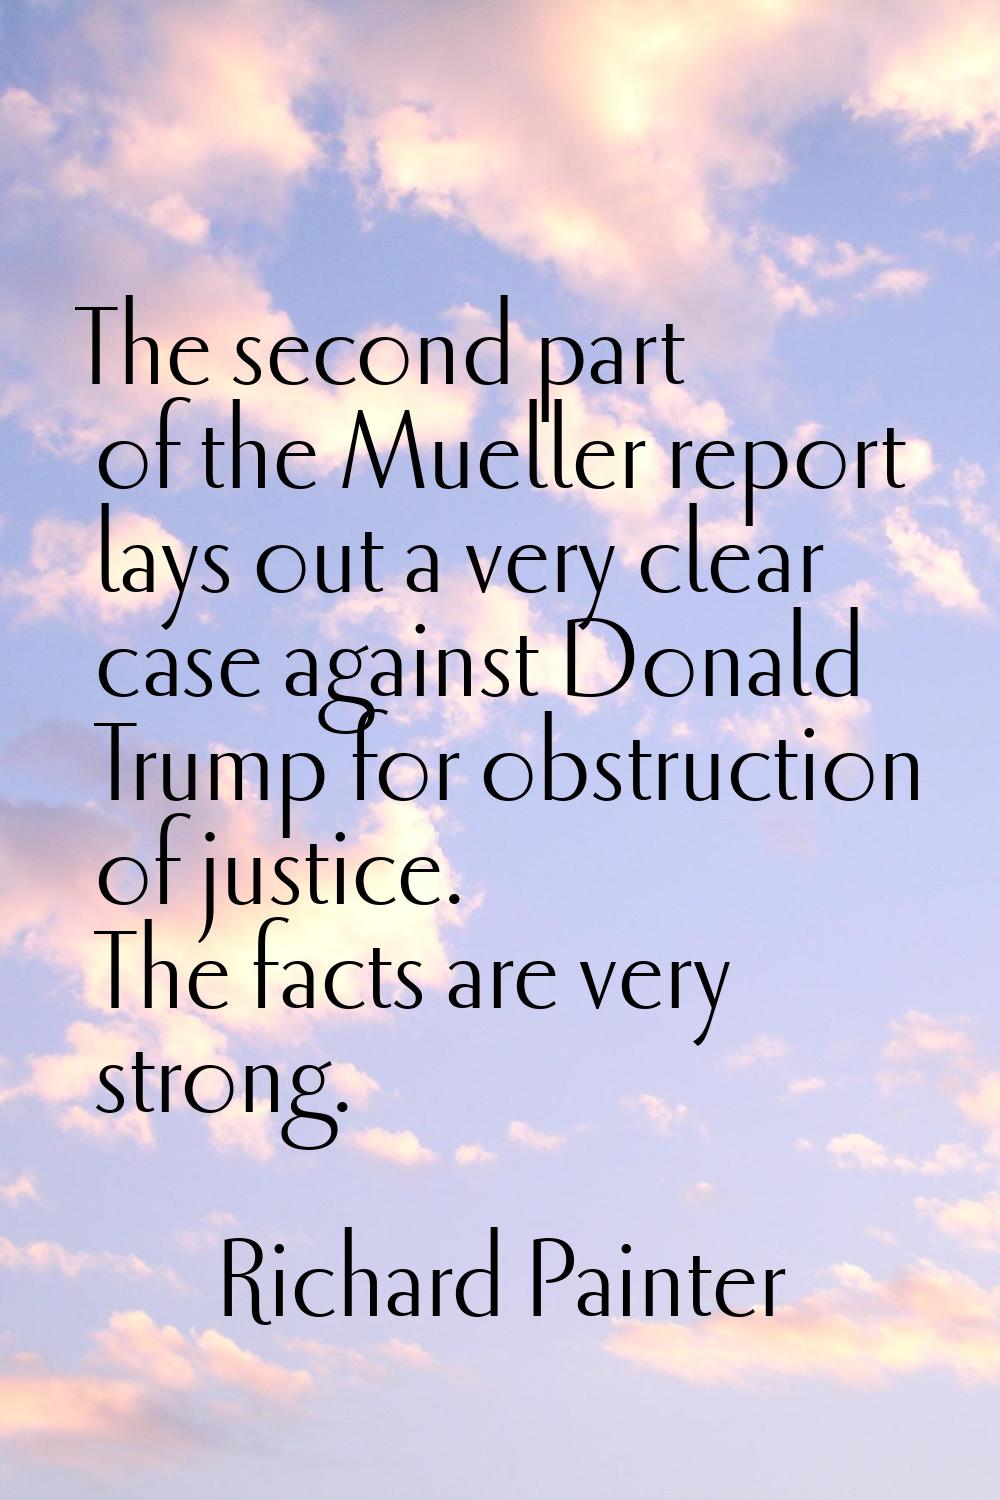 The second part of the Mueller report lays out a very clear case against Donald Trump for obstructi